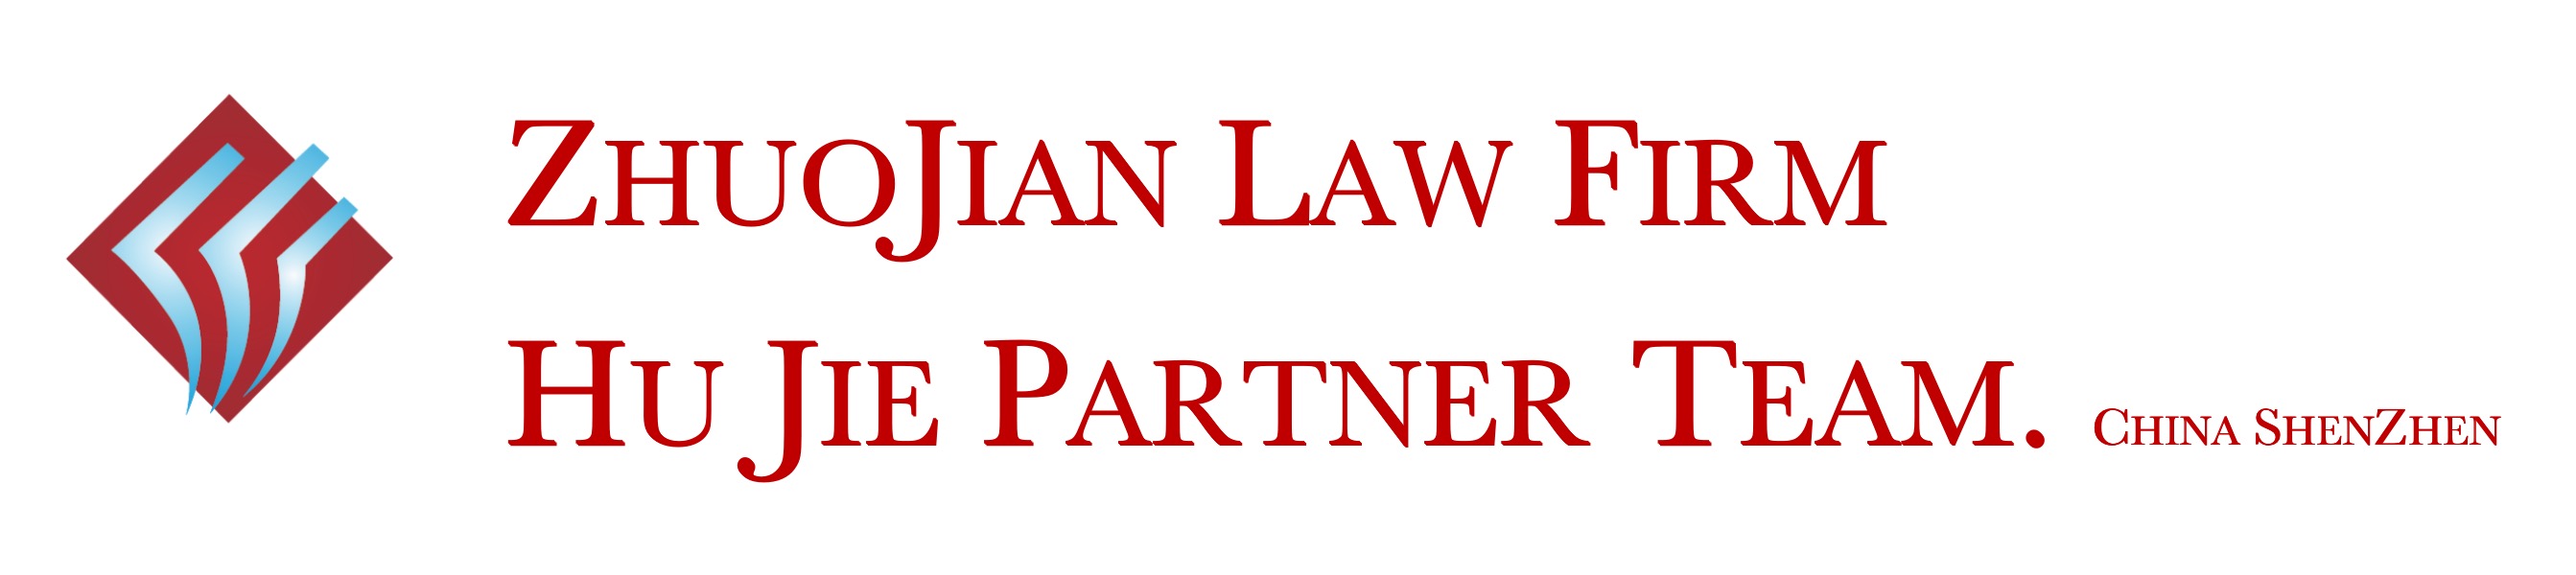 Civil Lawyer in China 